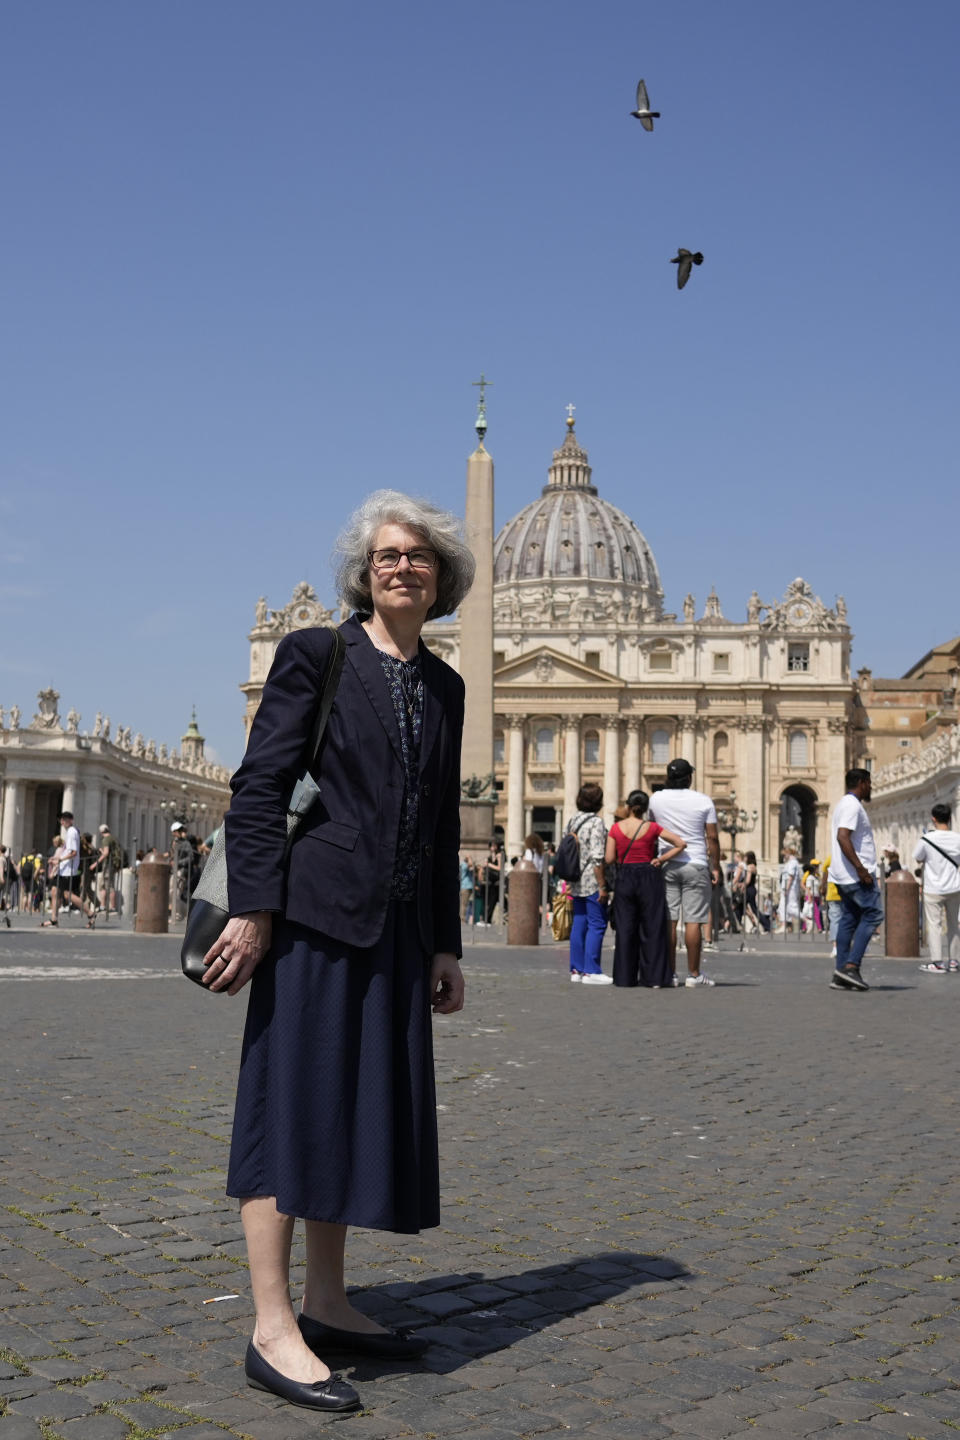 Sister Nathalie Becquart, the first female undersecretary in the Vatican's Synod of Bishops, poses for a photo in front of St. Peter's Square, Monday, May 29, 2023. In her years running Catholic youth programs in France, Becquart often invoked her own experience as a seasoned sailor in urging young people to weather the storms of their lives. “There’s nothing stronger than seeing the sunrise after a storm, the flat calm of the sea,” she says. (AP Photo/Alessandra Tarantino)